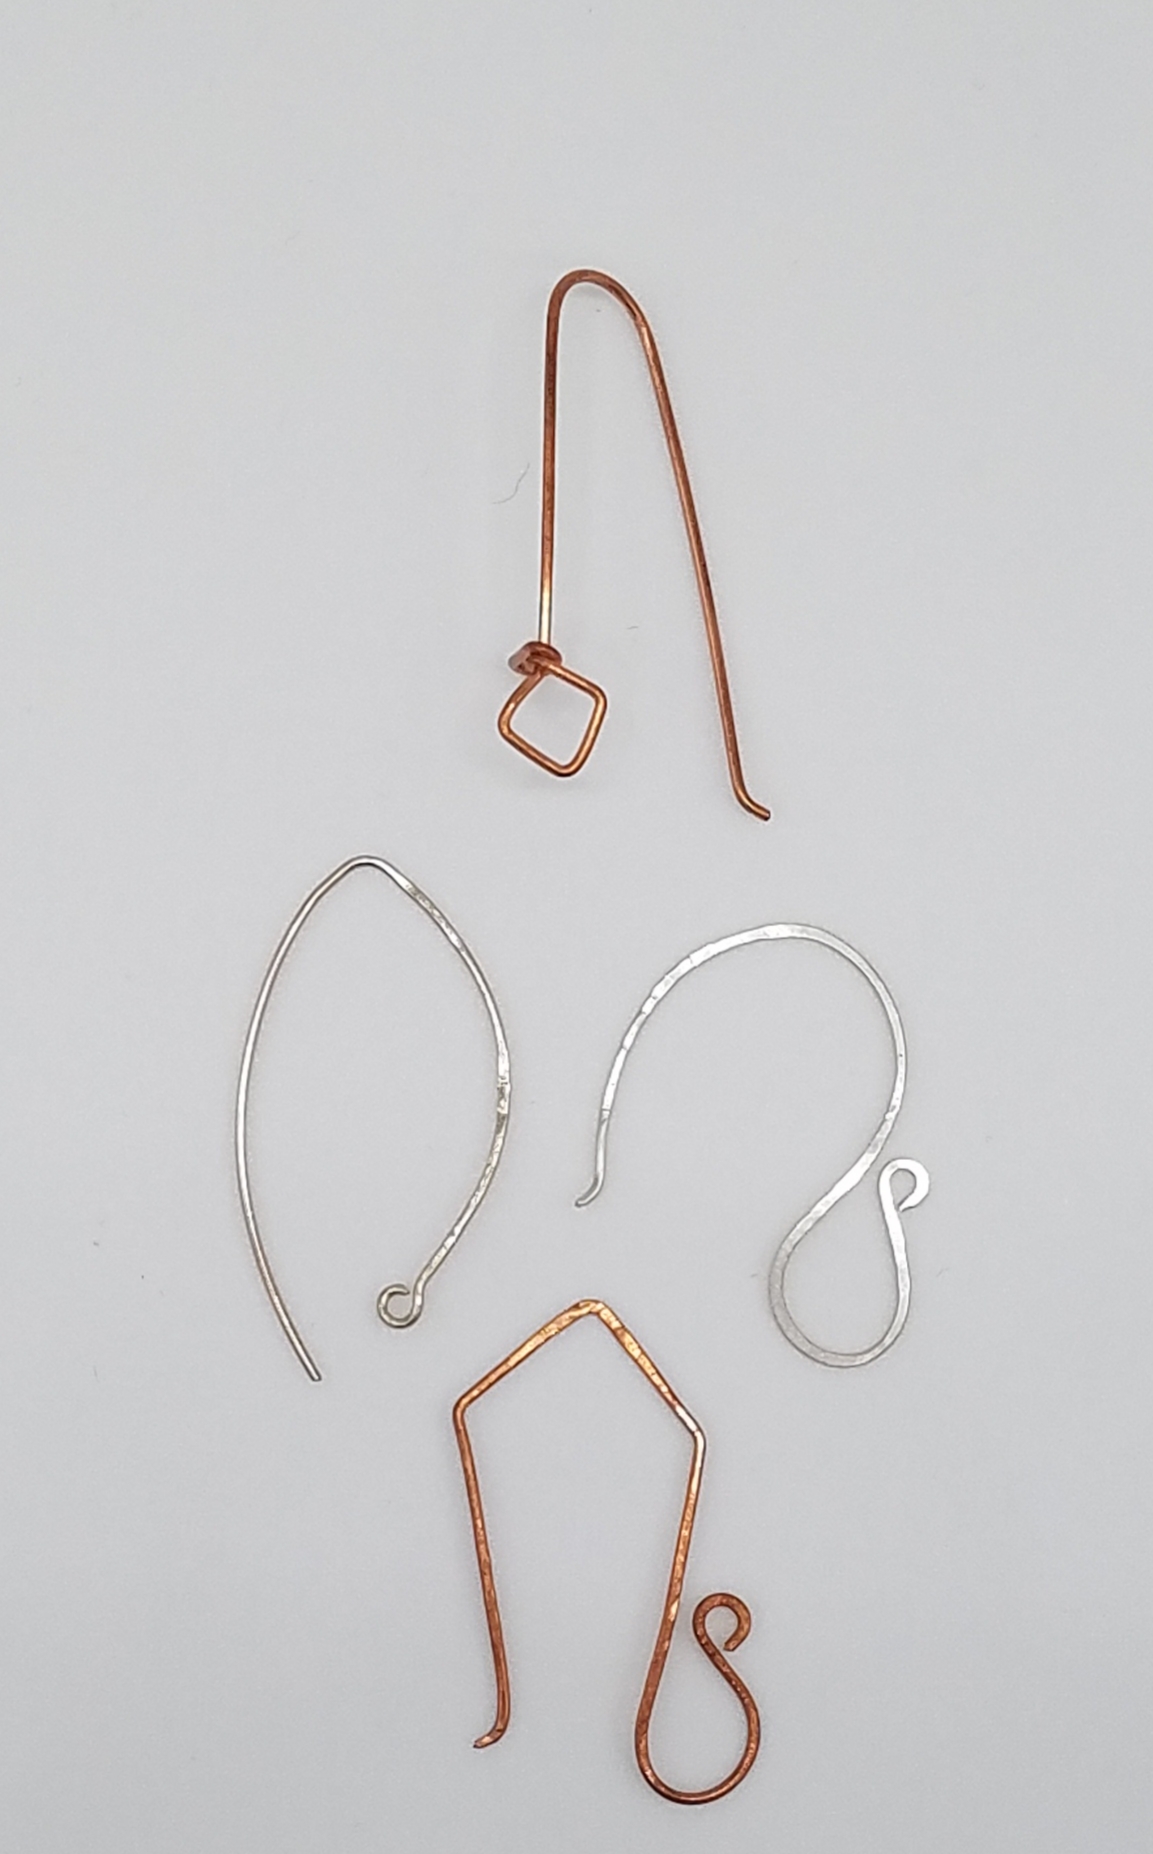 Making Your Own Earwires - Beaducation.com 